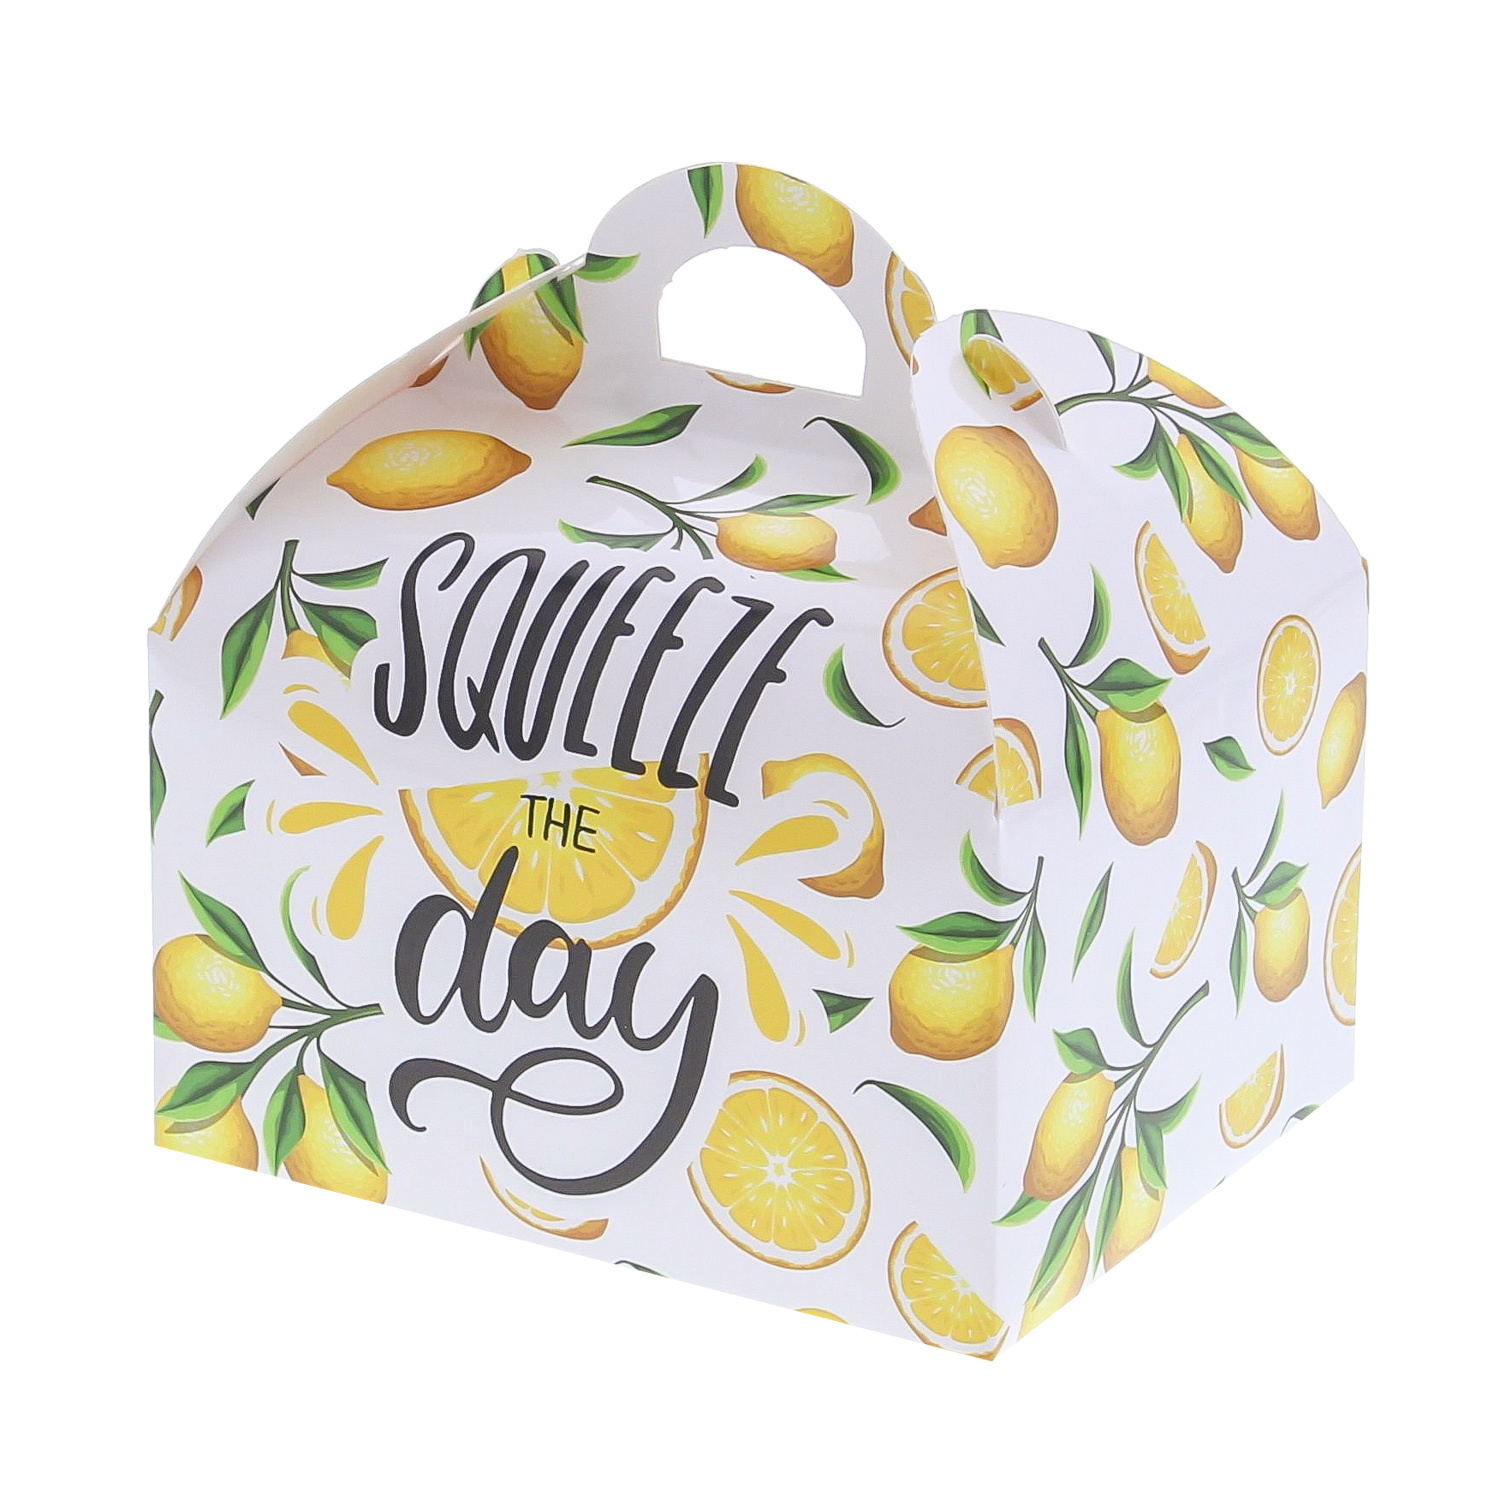 Sweetbox mit Griff MAXI "Lemons" squeeze the day - 160*140*170 mm - 24 Stück